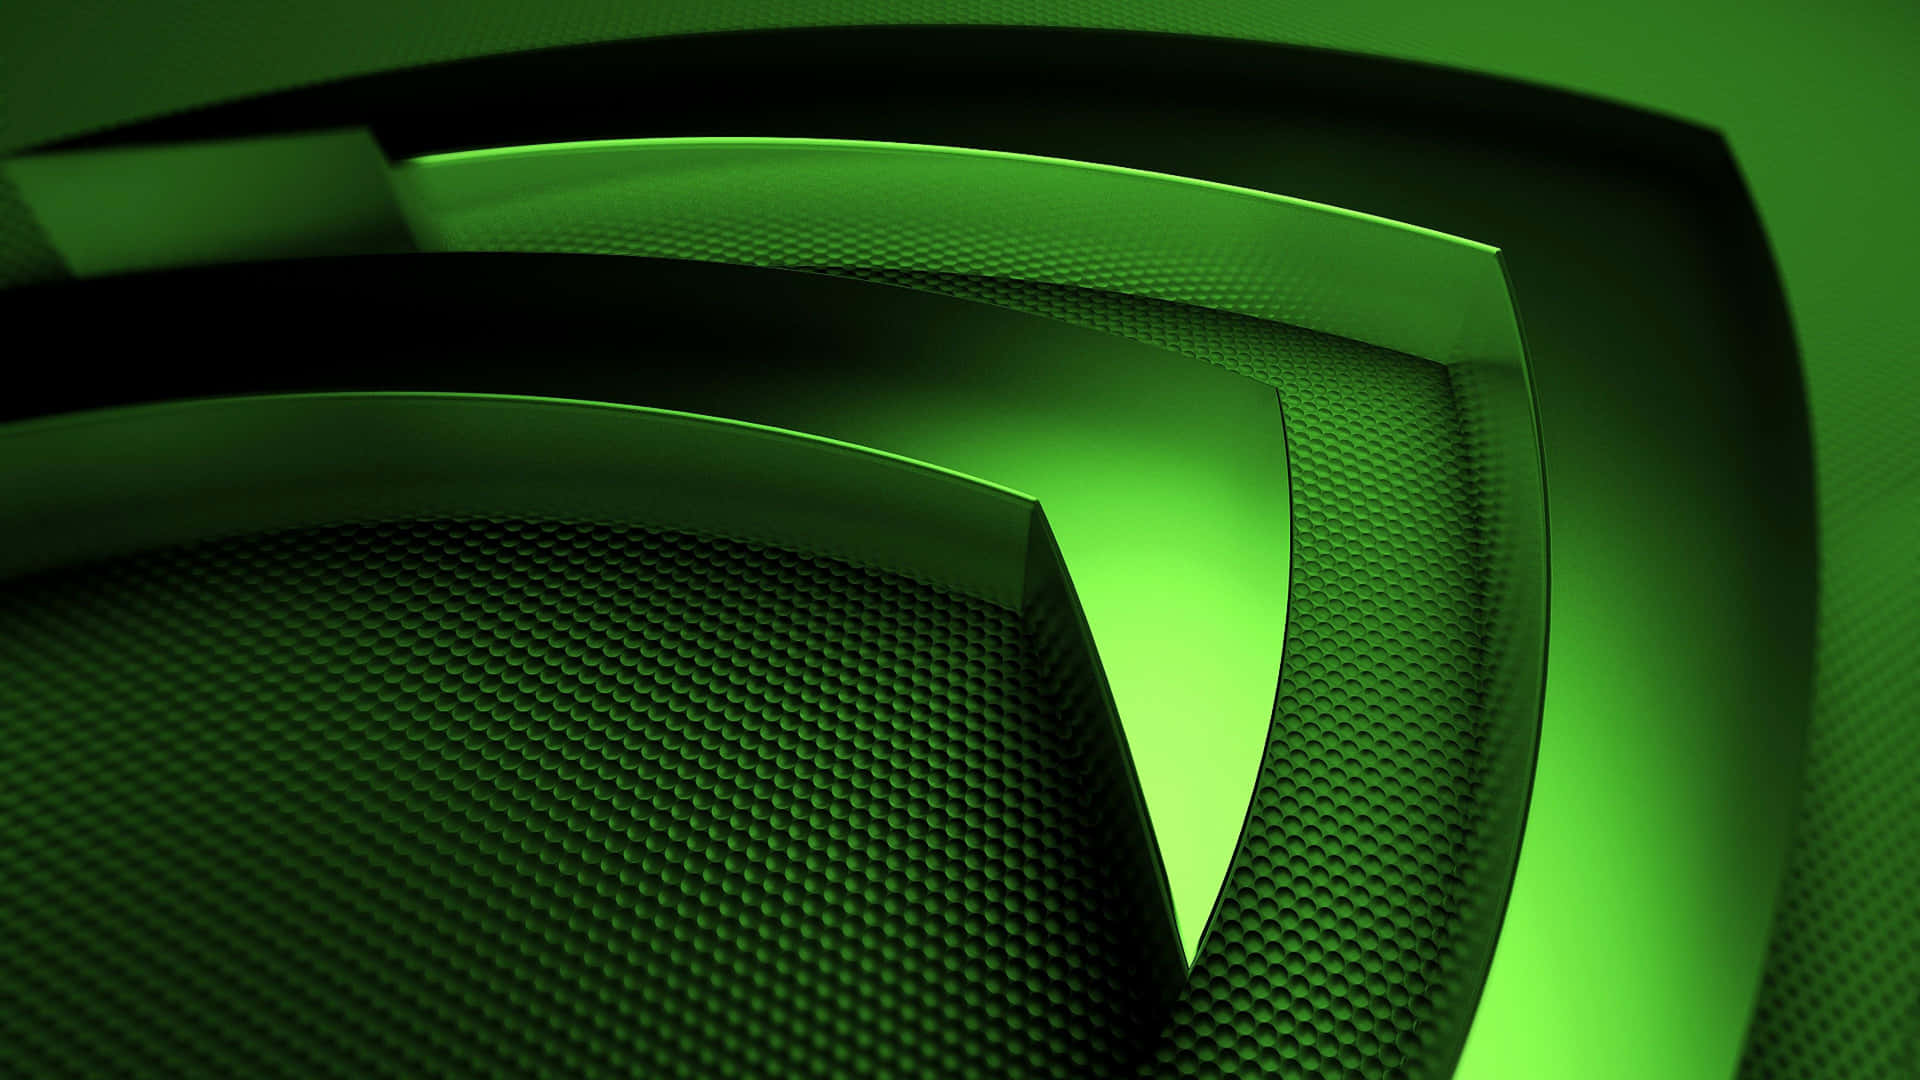 Get Ready for Ultra High Definition with Nvidia Wallpaper